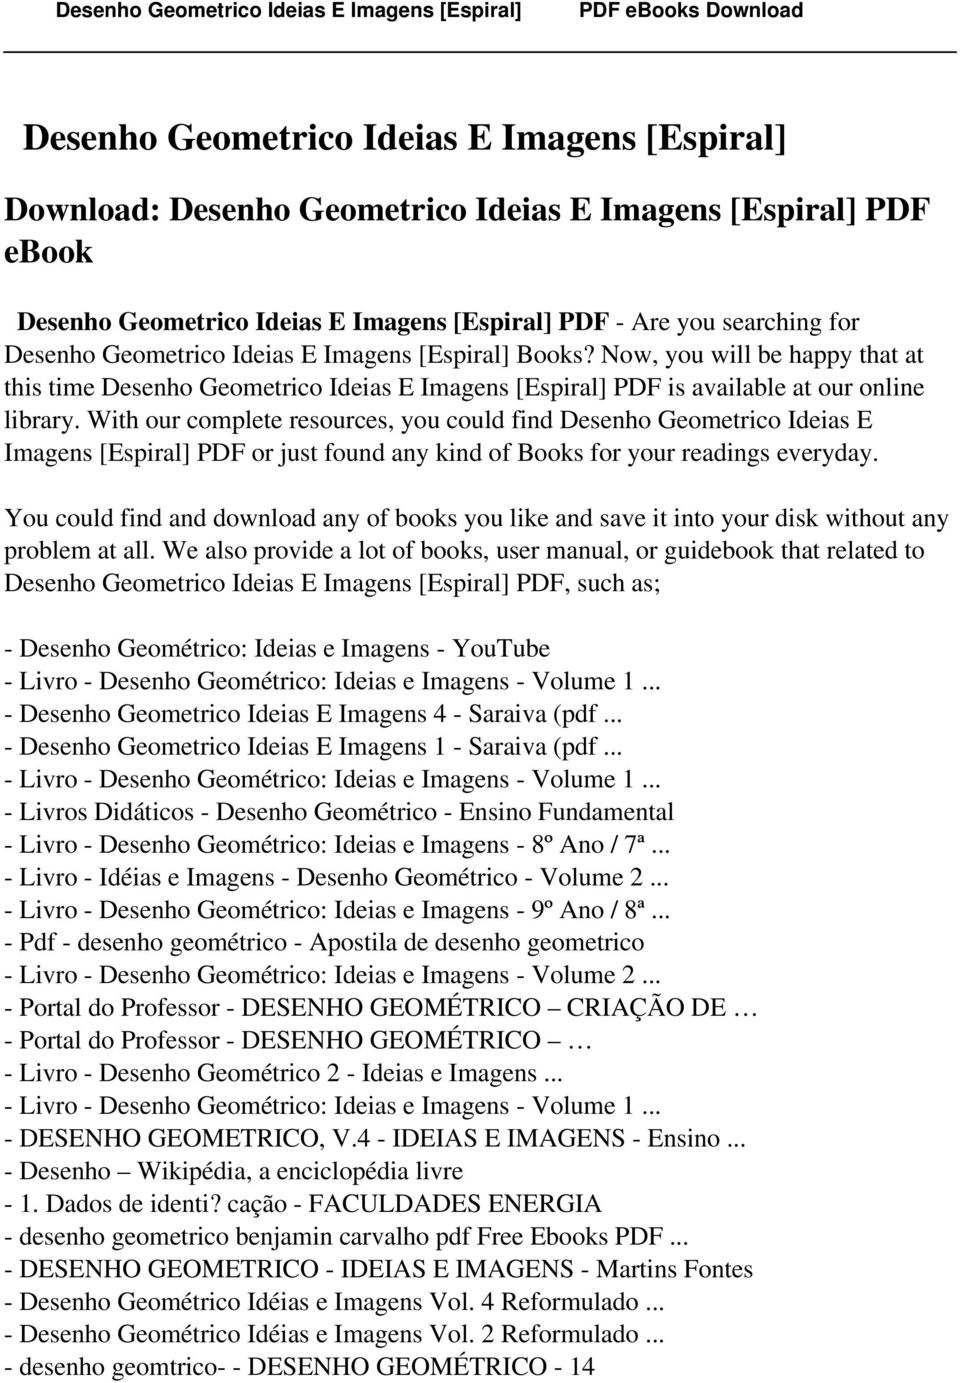 With our complete resources, you could find Desenho Geometrico Ideias E Imagens [Espiral] PDF or just found any kind of Books for your readings everyday.